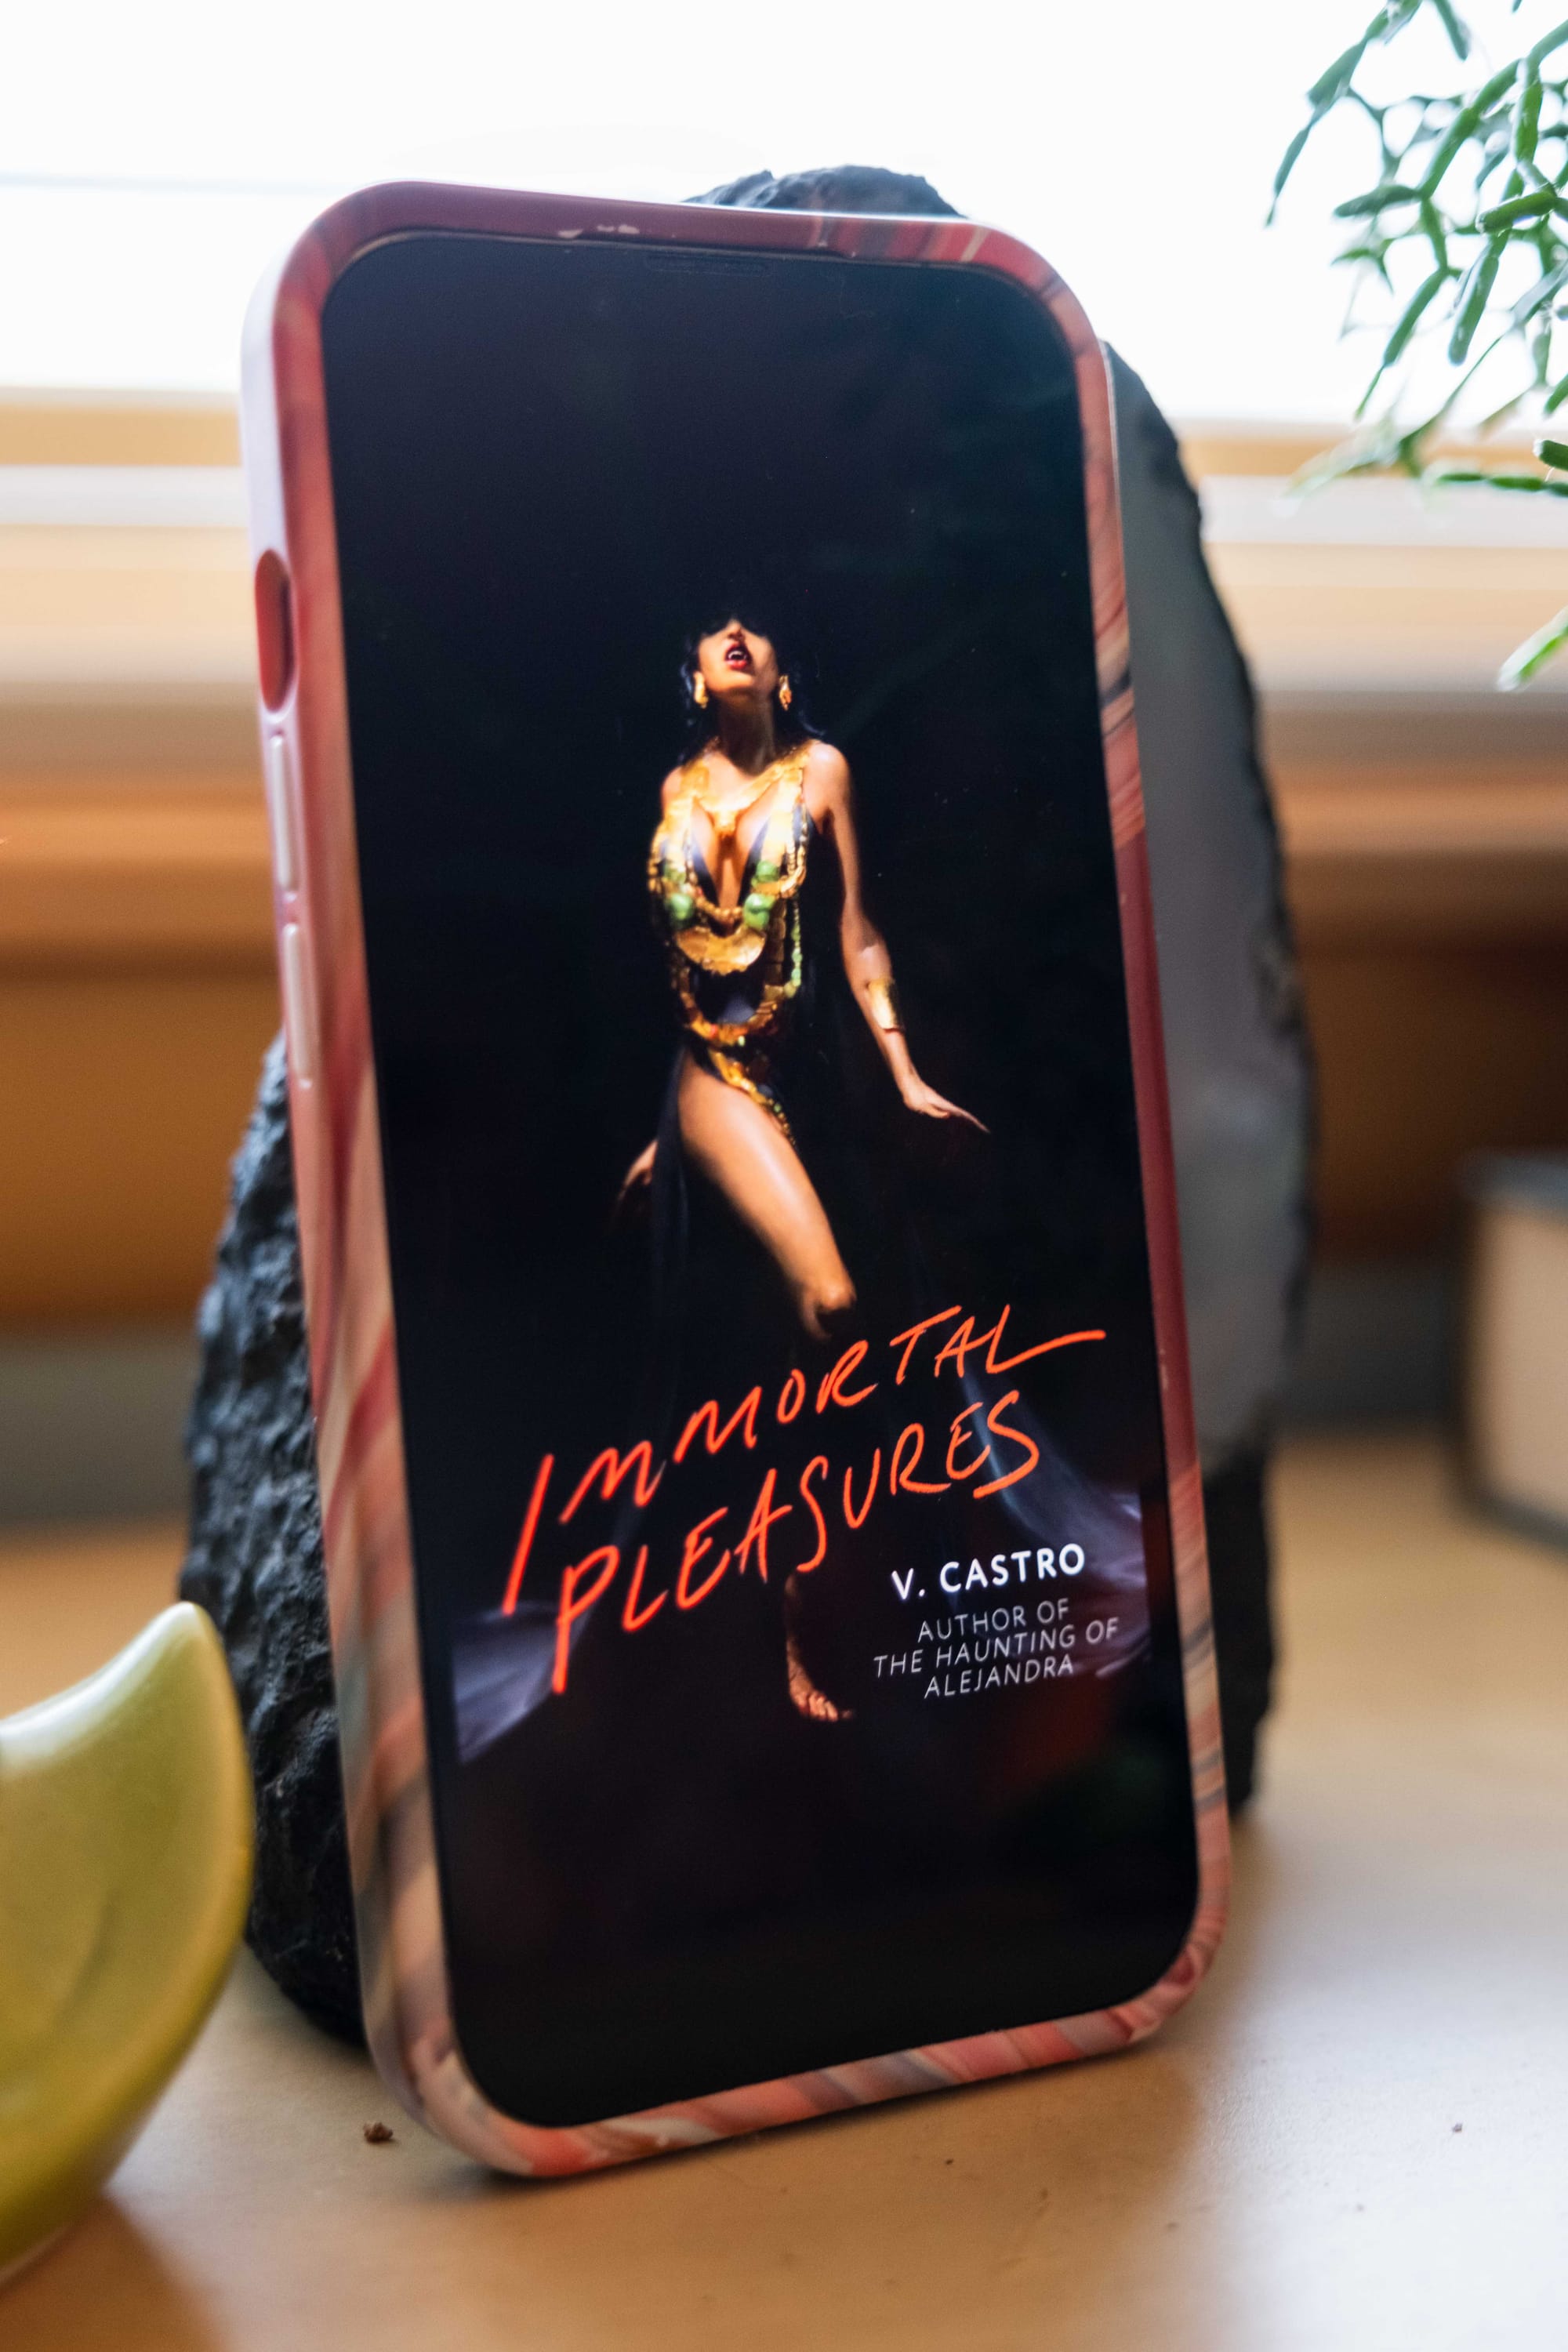 Book cover for Immortal Pleasures by V. Castro on an iPhone